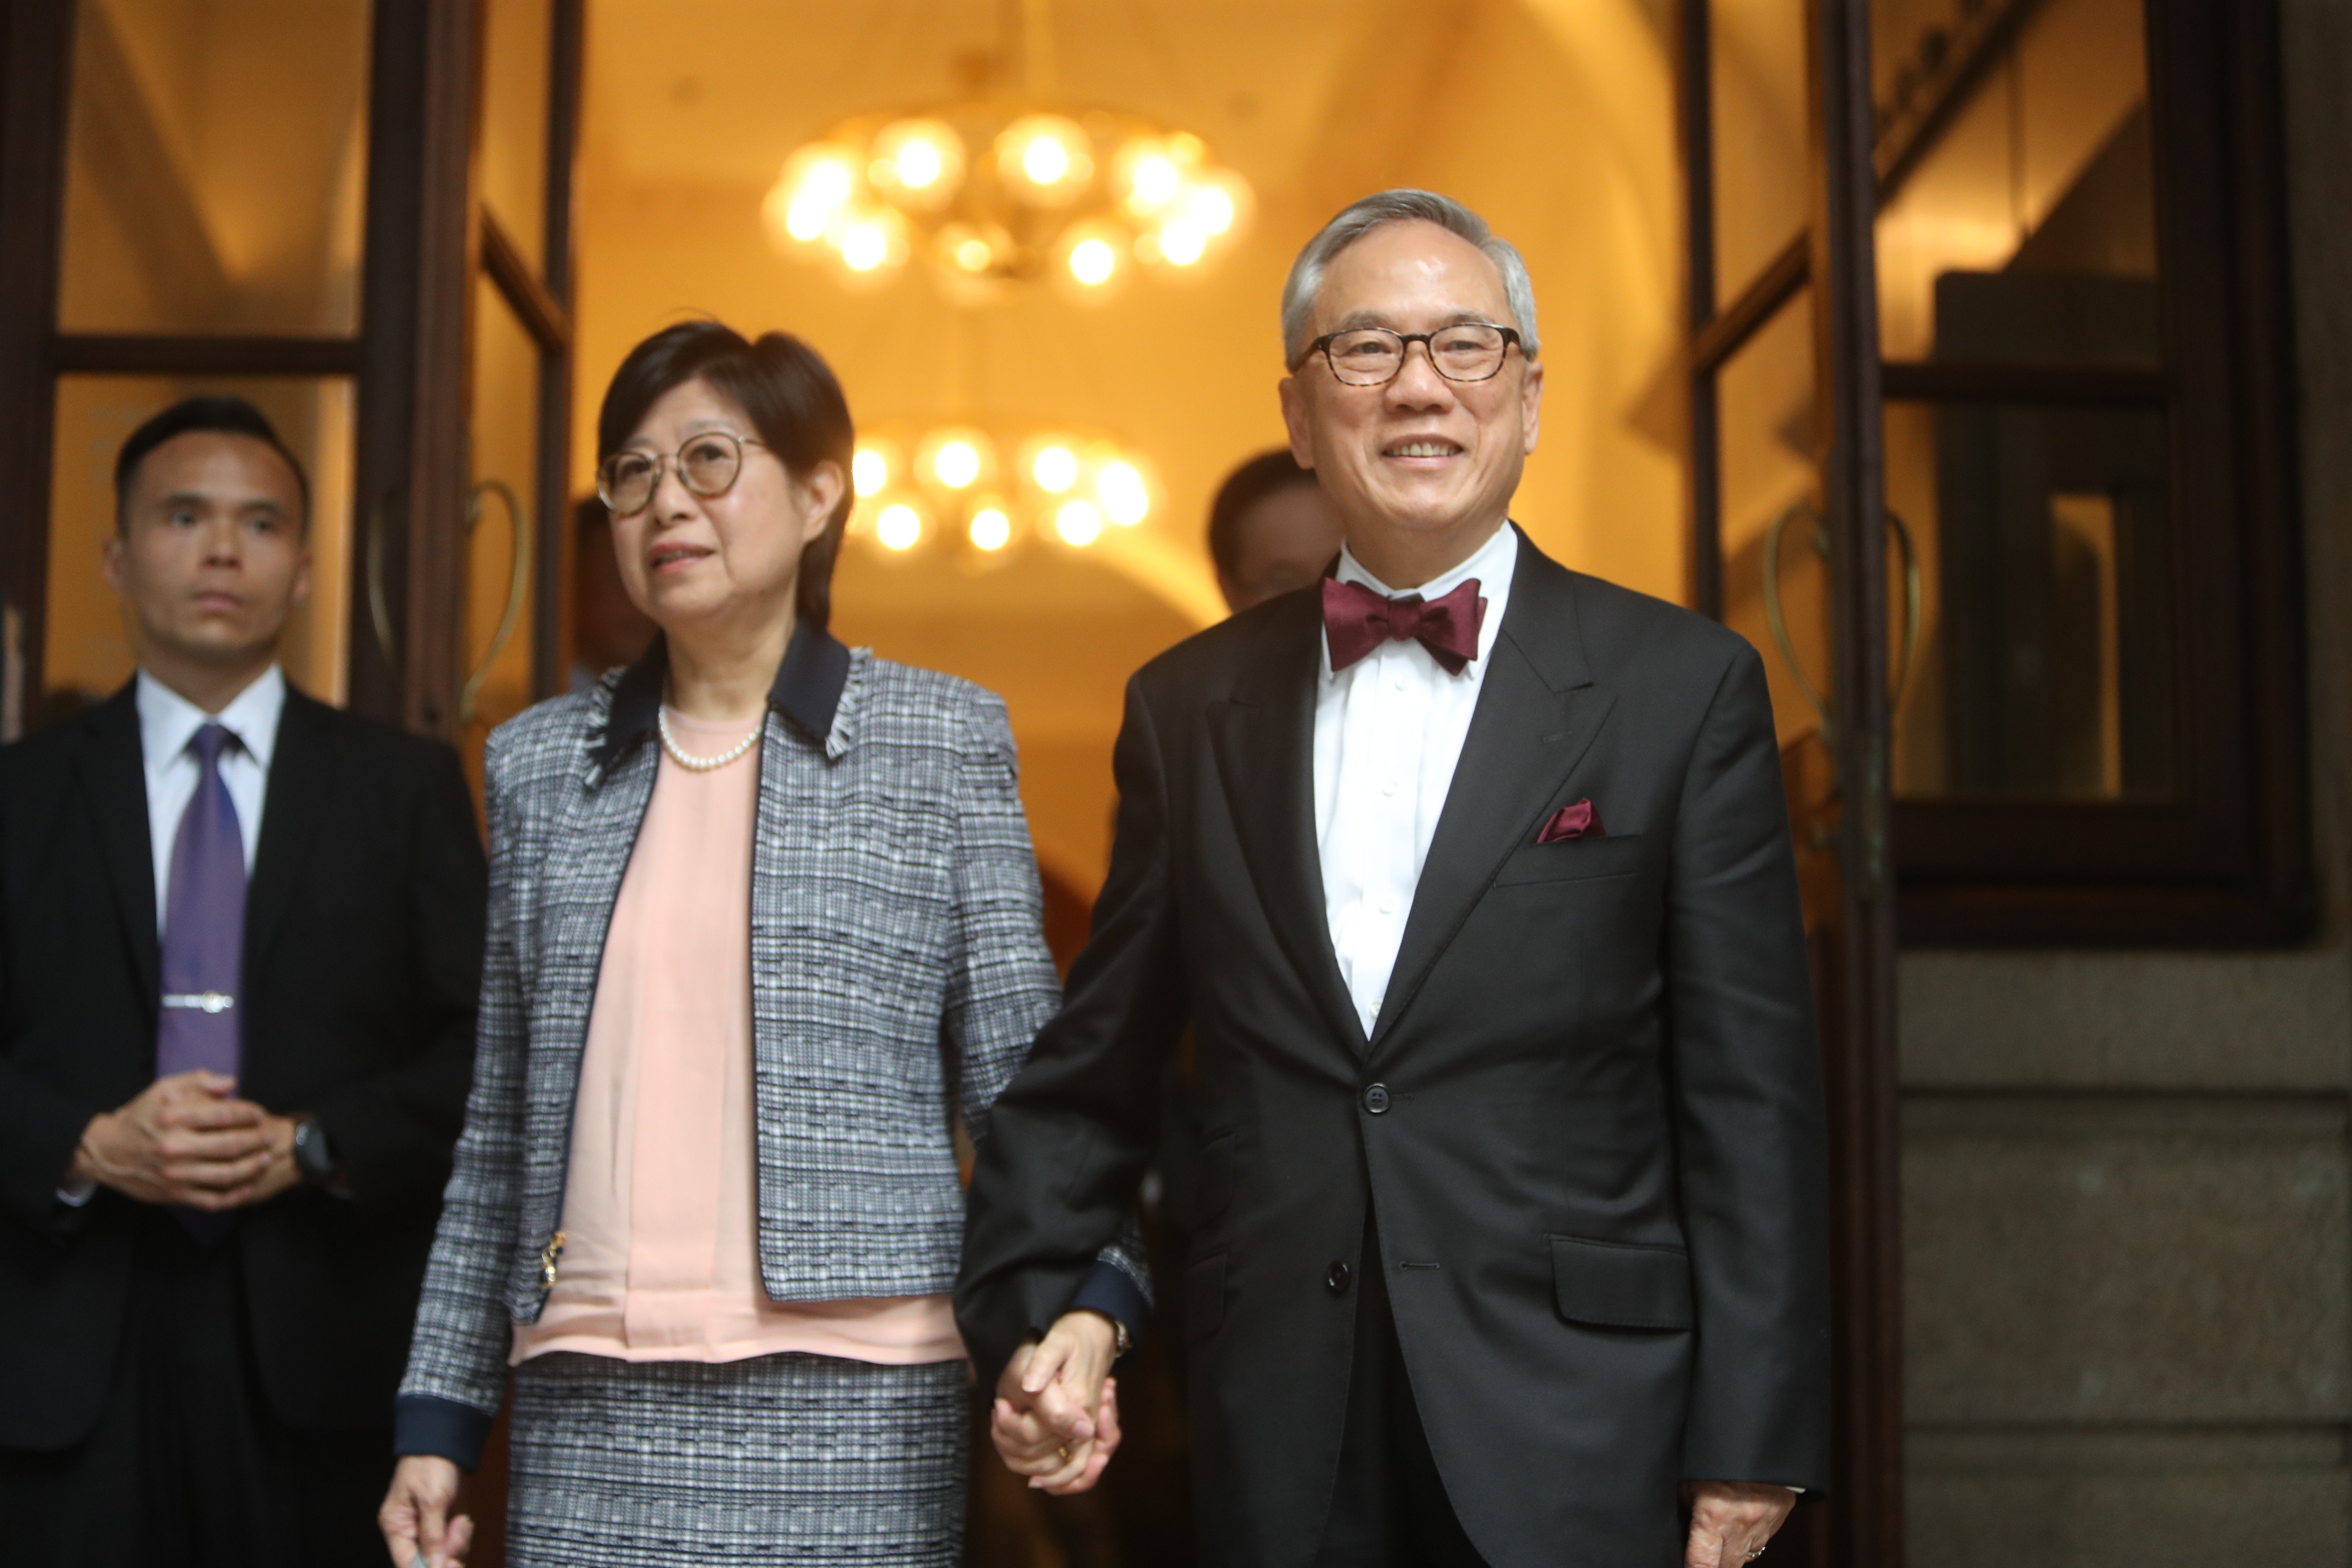 Former Hong Kong chief executive Donald Tsang and his wife Selina leave the Court of Final Appeal in May. The court quashed his previous conviction for misconduct in public office on June 26. He served nearly a year in prison for that conviction. Photo: Winson Wong